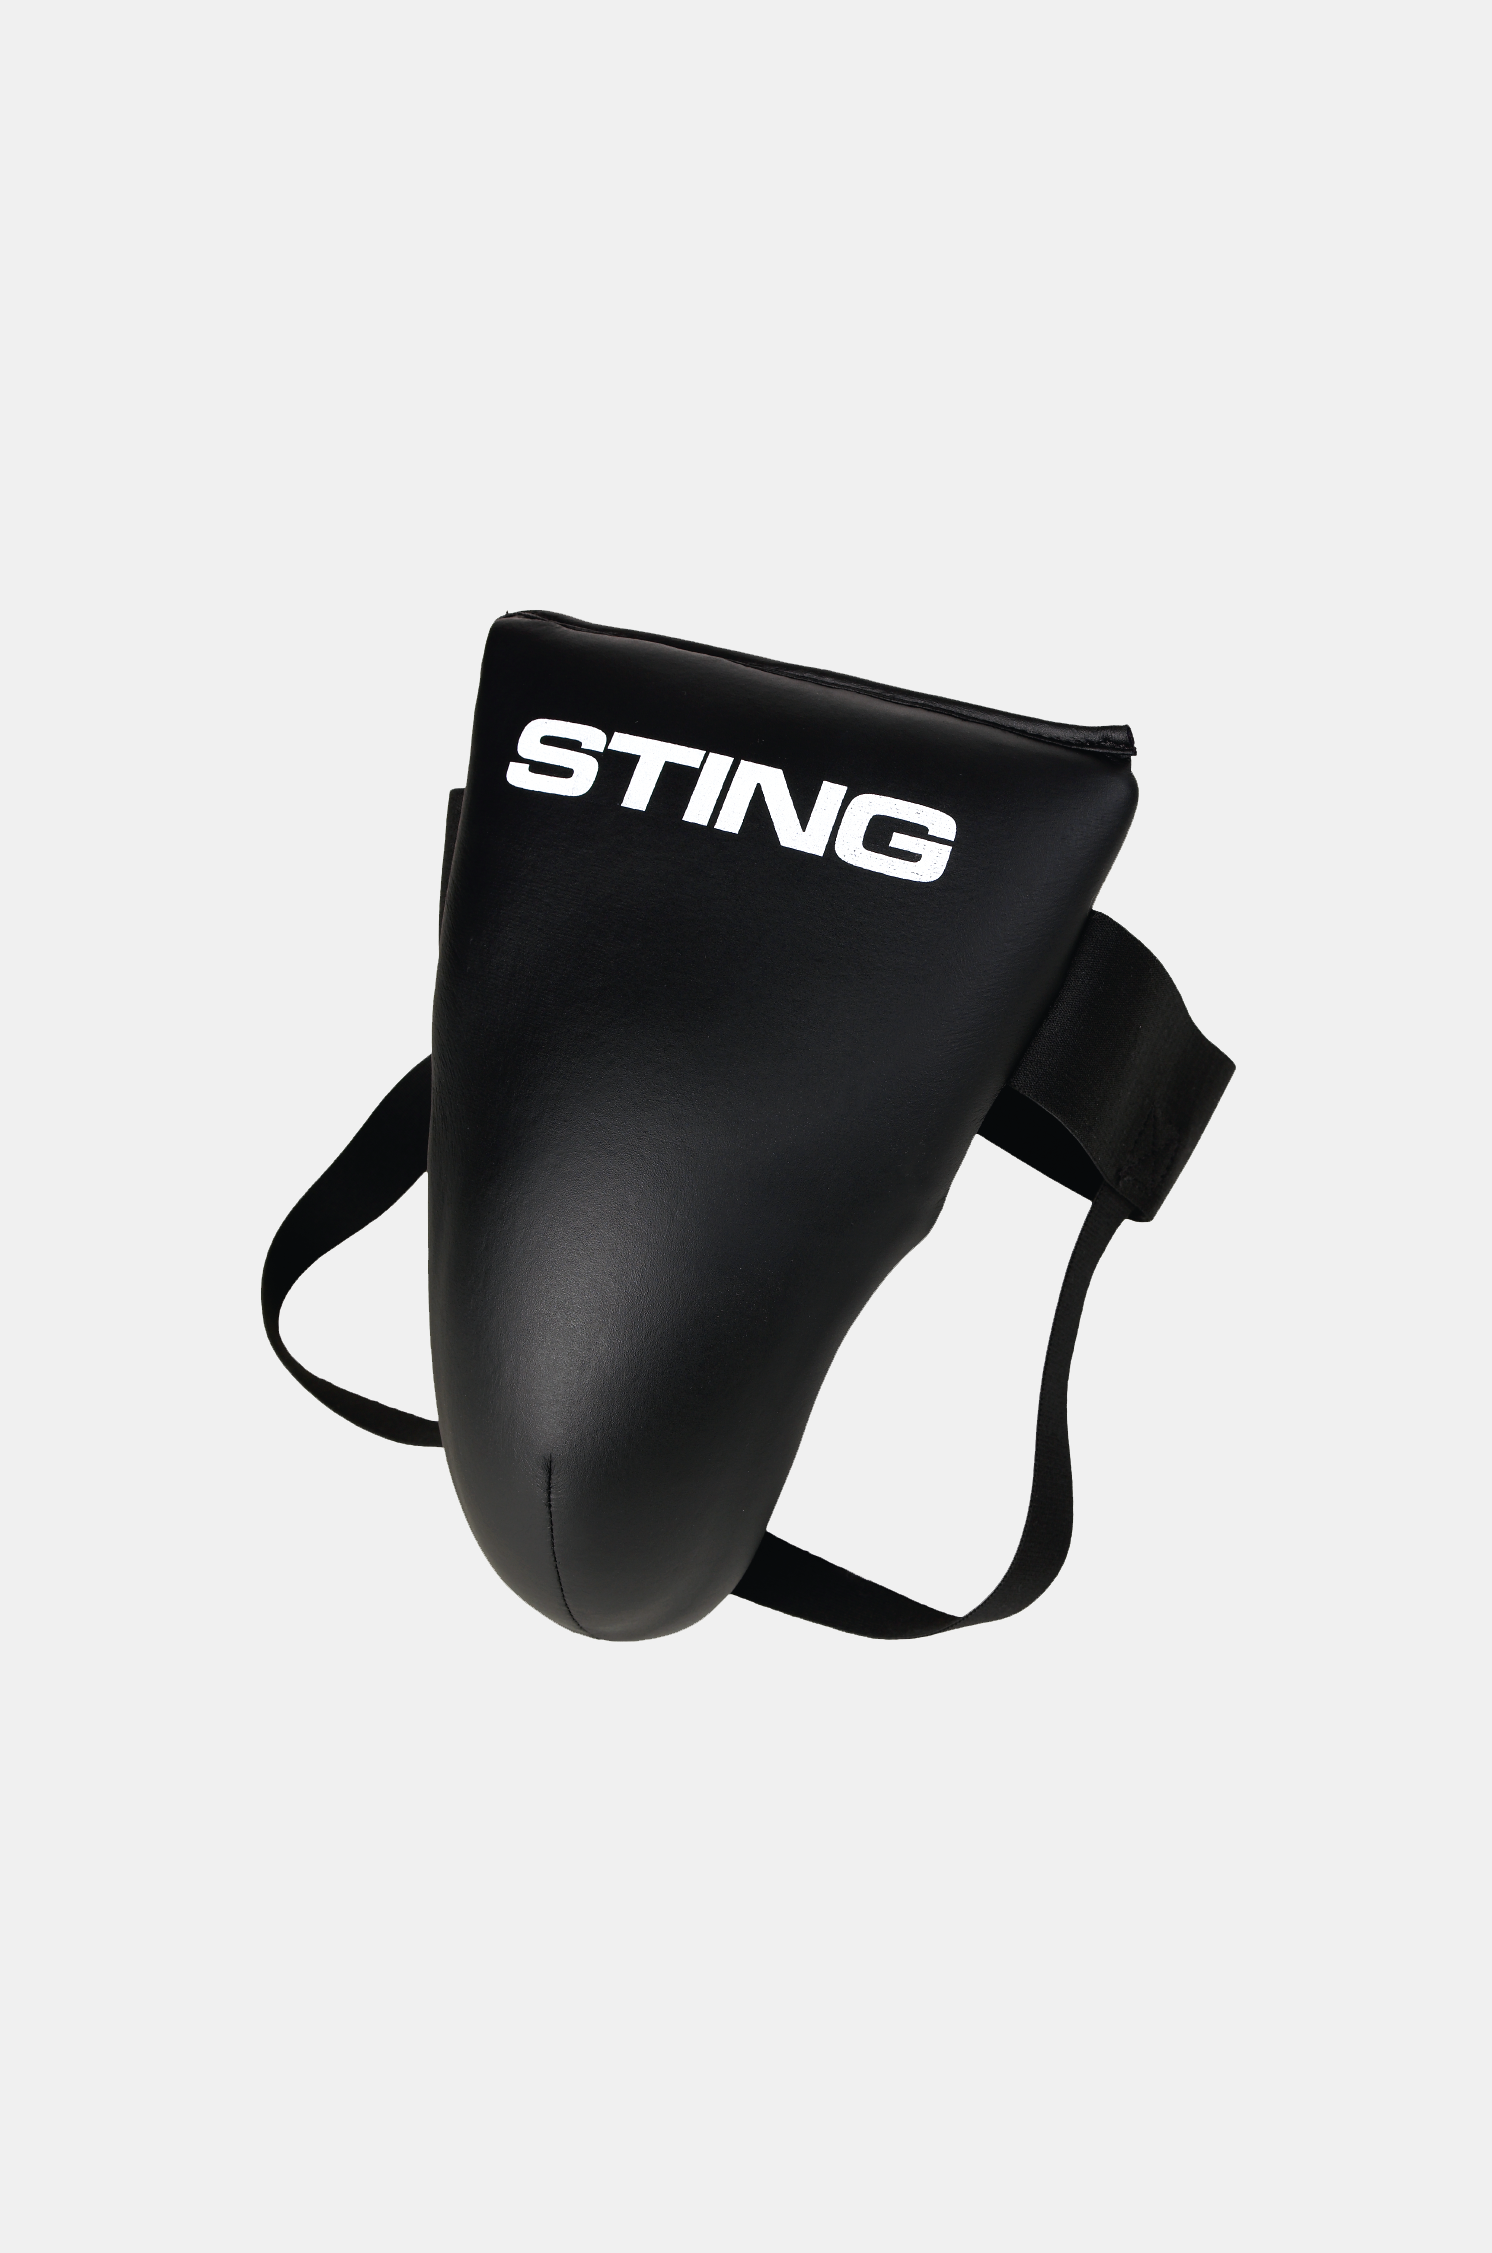 STING Competition Light Groin Guard